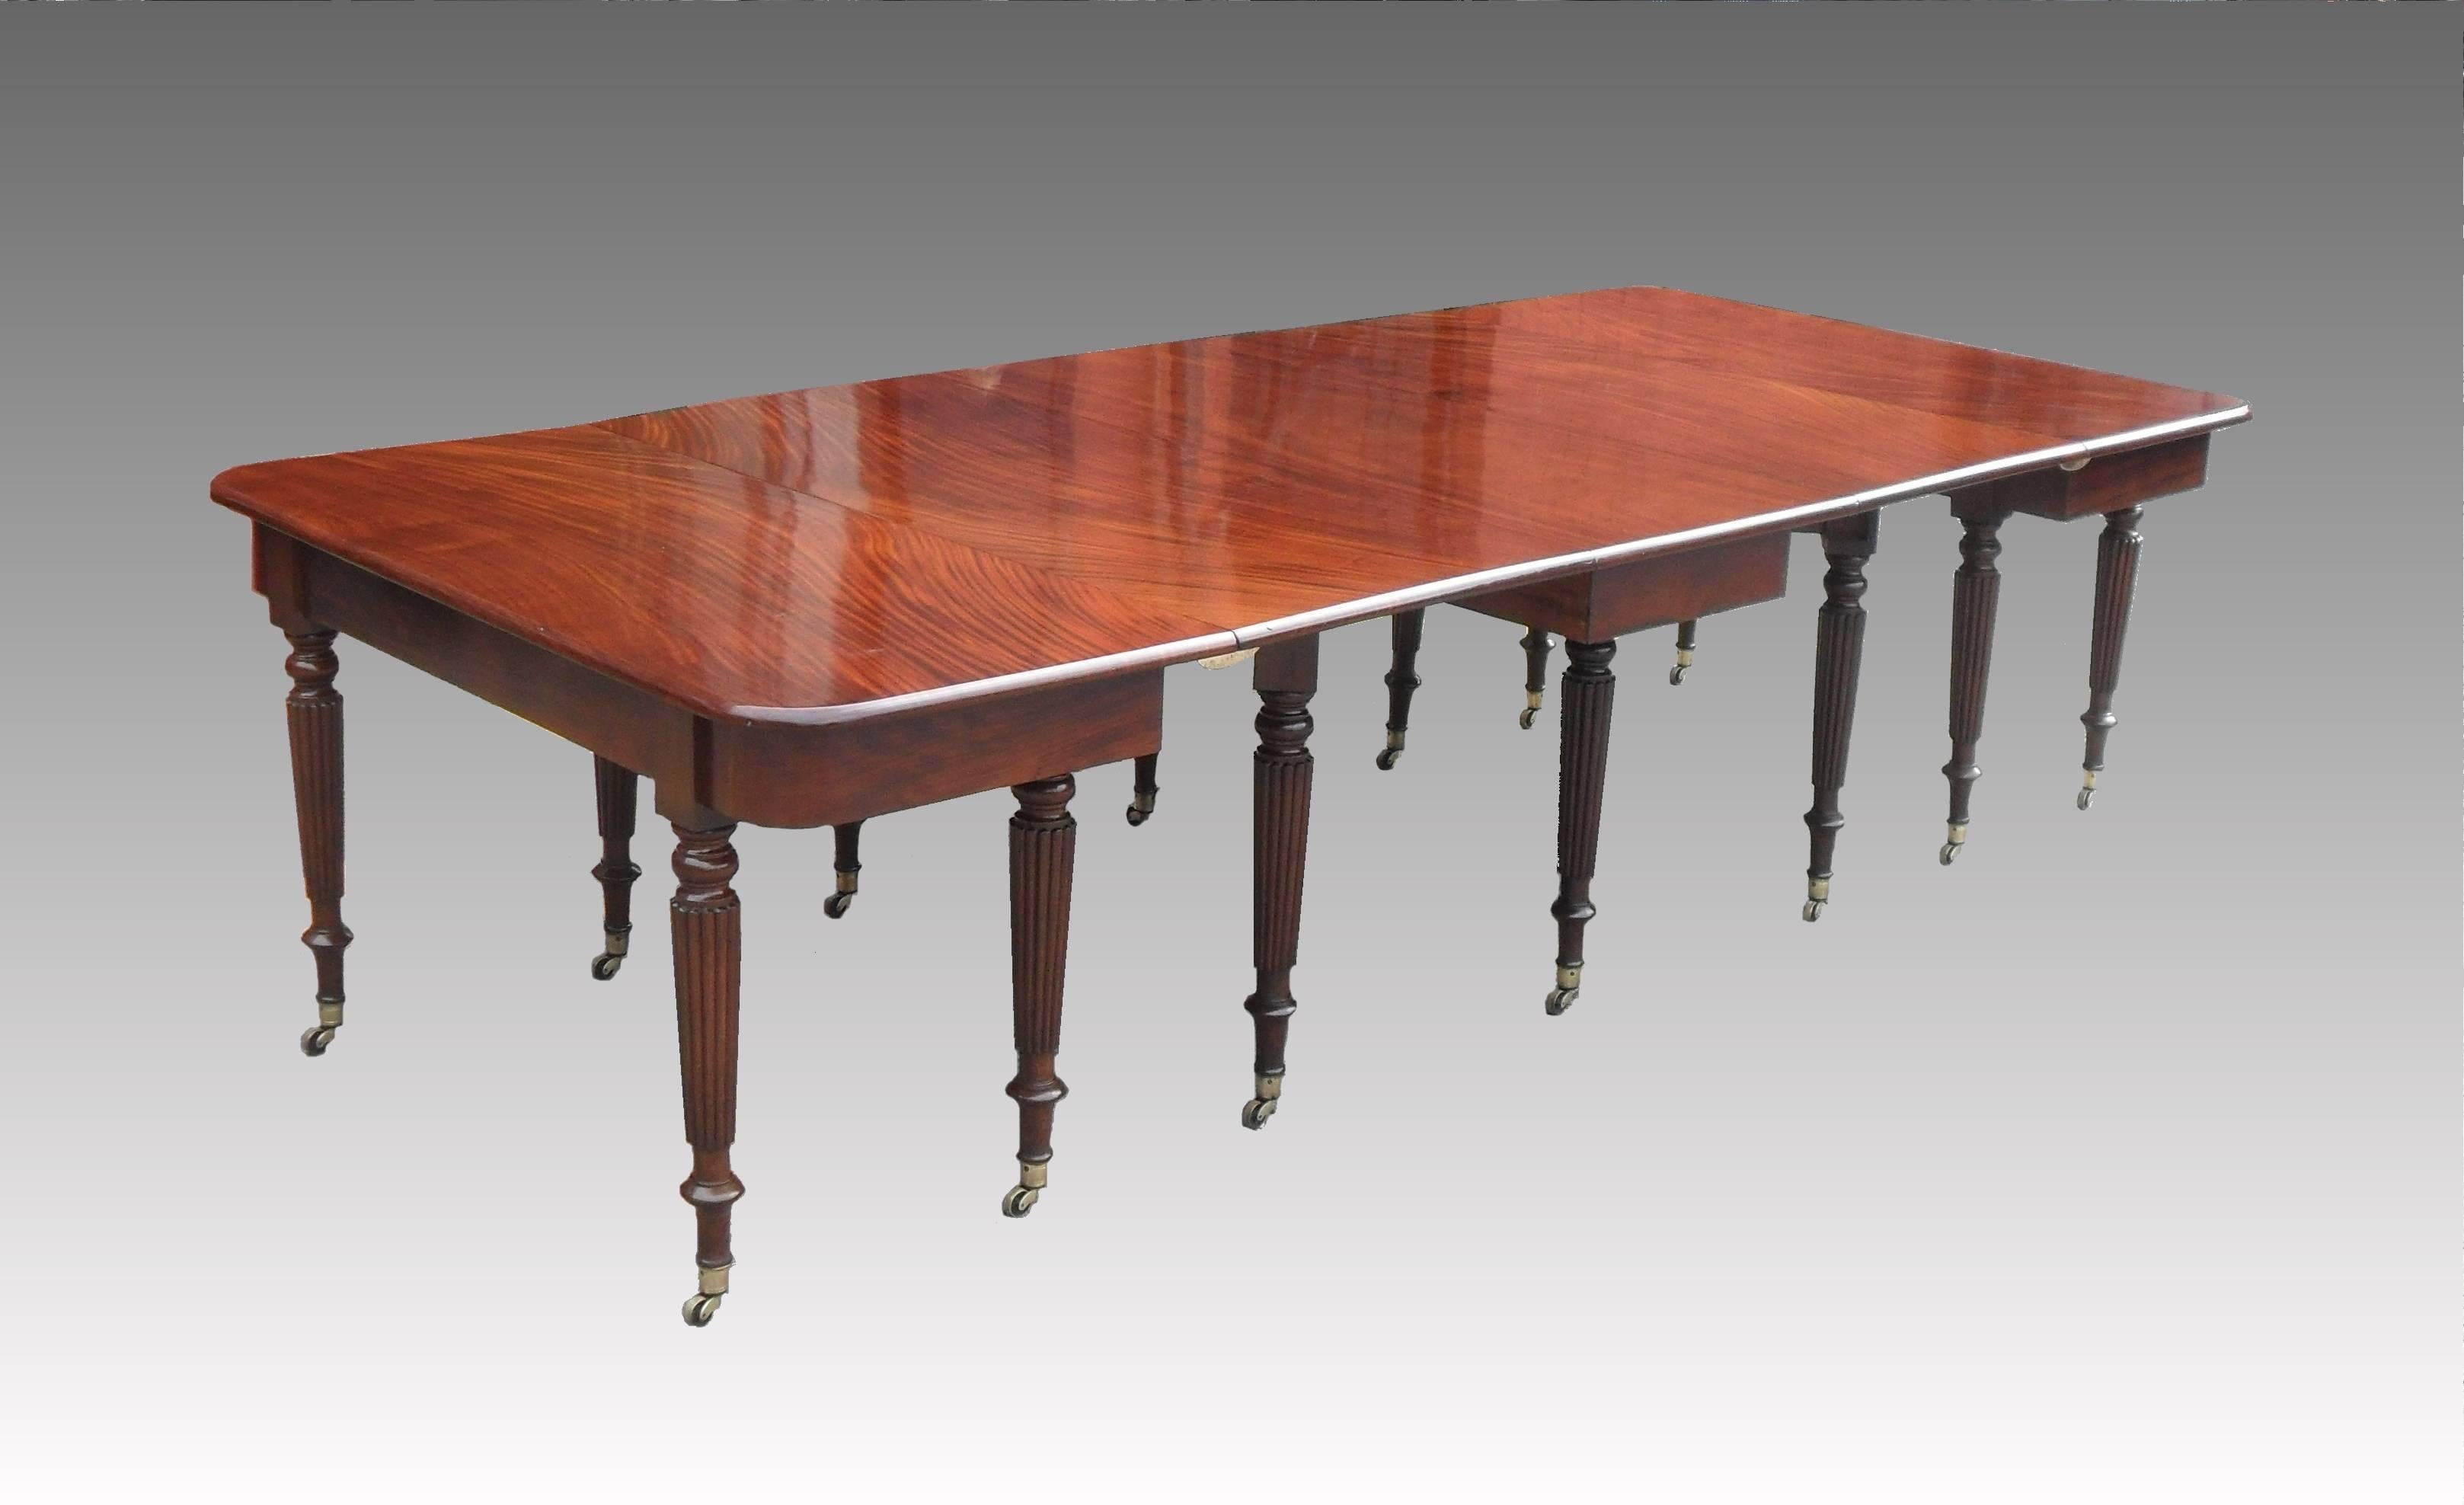 An outstanding quality George IV multifunctional figured mahogany three sectional extending dining table stood on fourteen finely turned and reeded legs with original brass cup castors. The table has a beautiful figured solid mahogany bookmatched